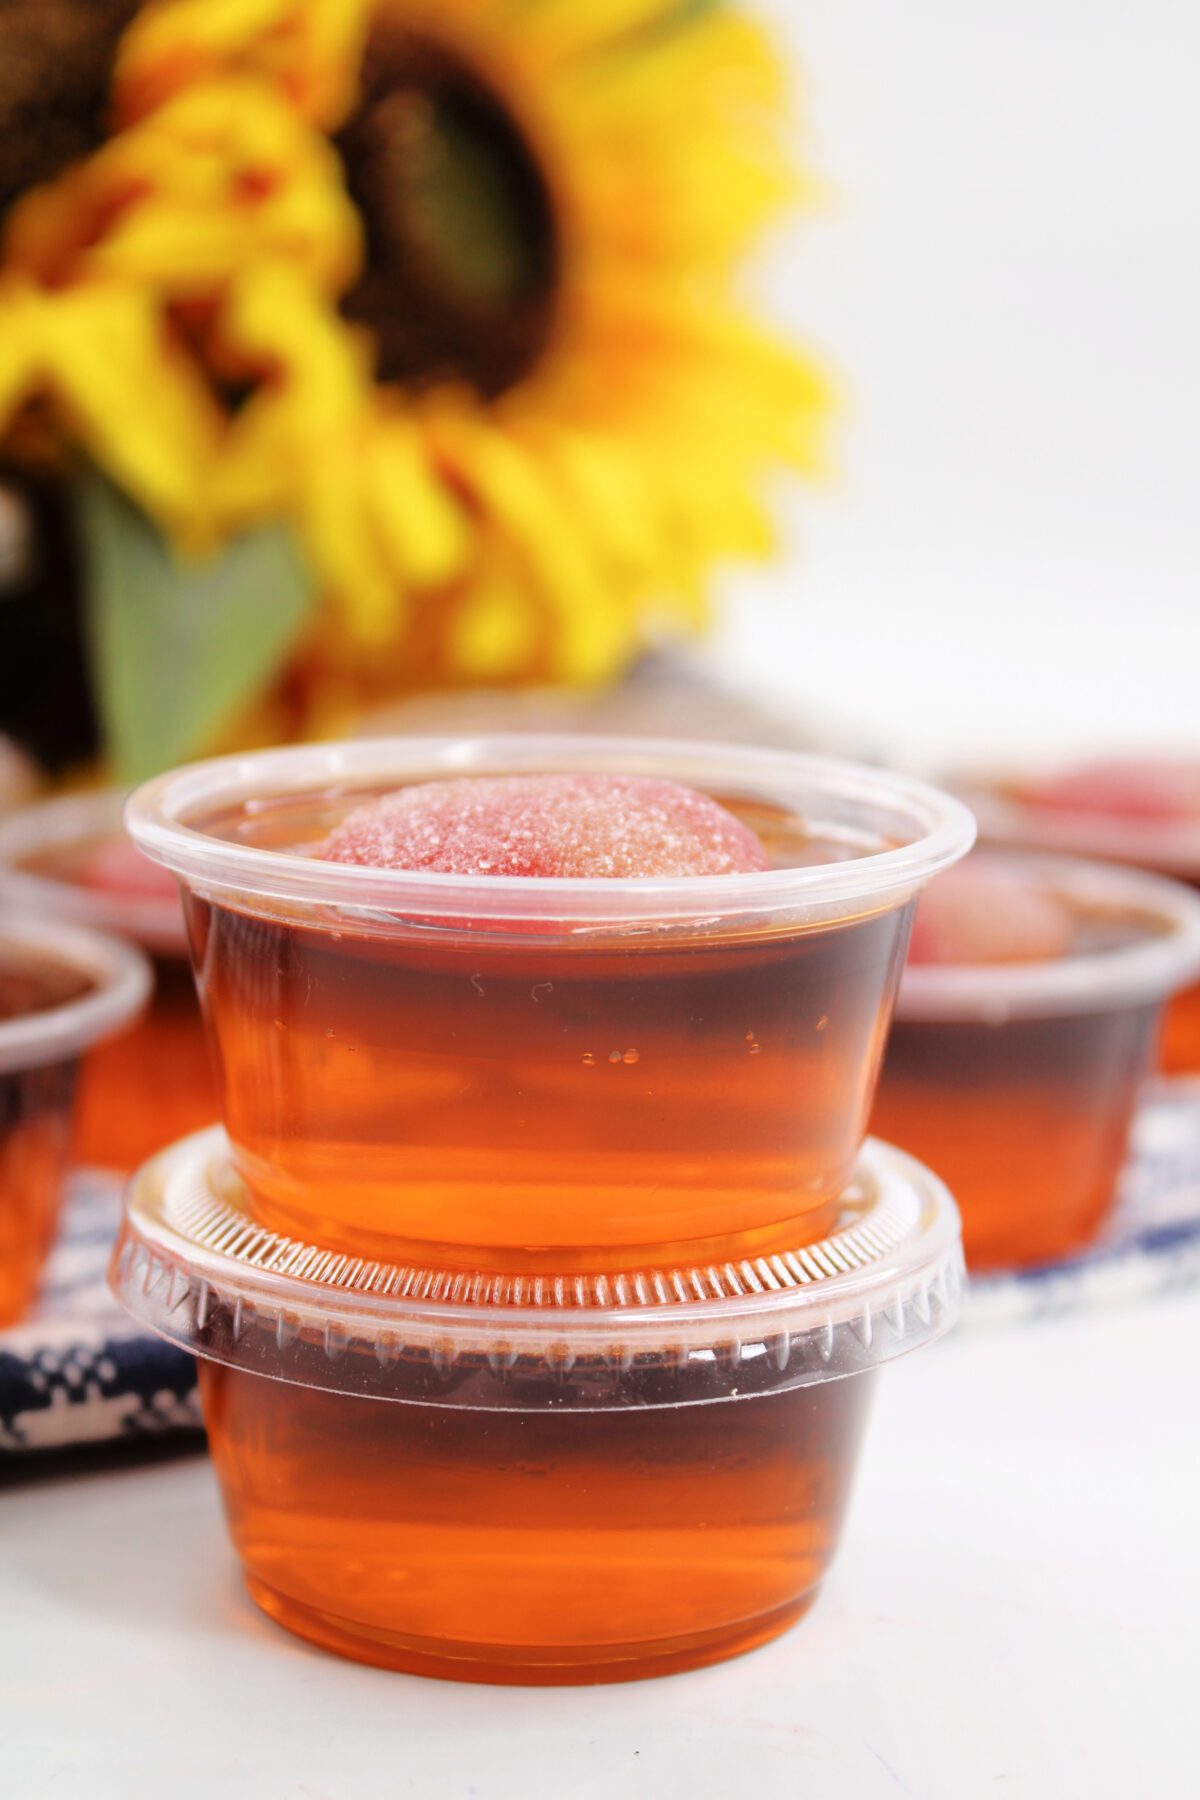 Looking for a fun and easy party recipe? These Crown Peach Jello Shots are perfect for your next get together!